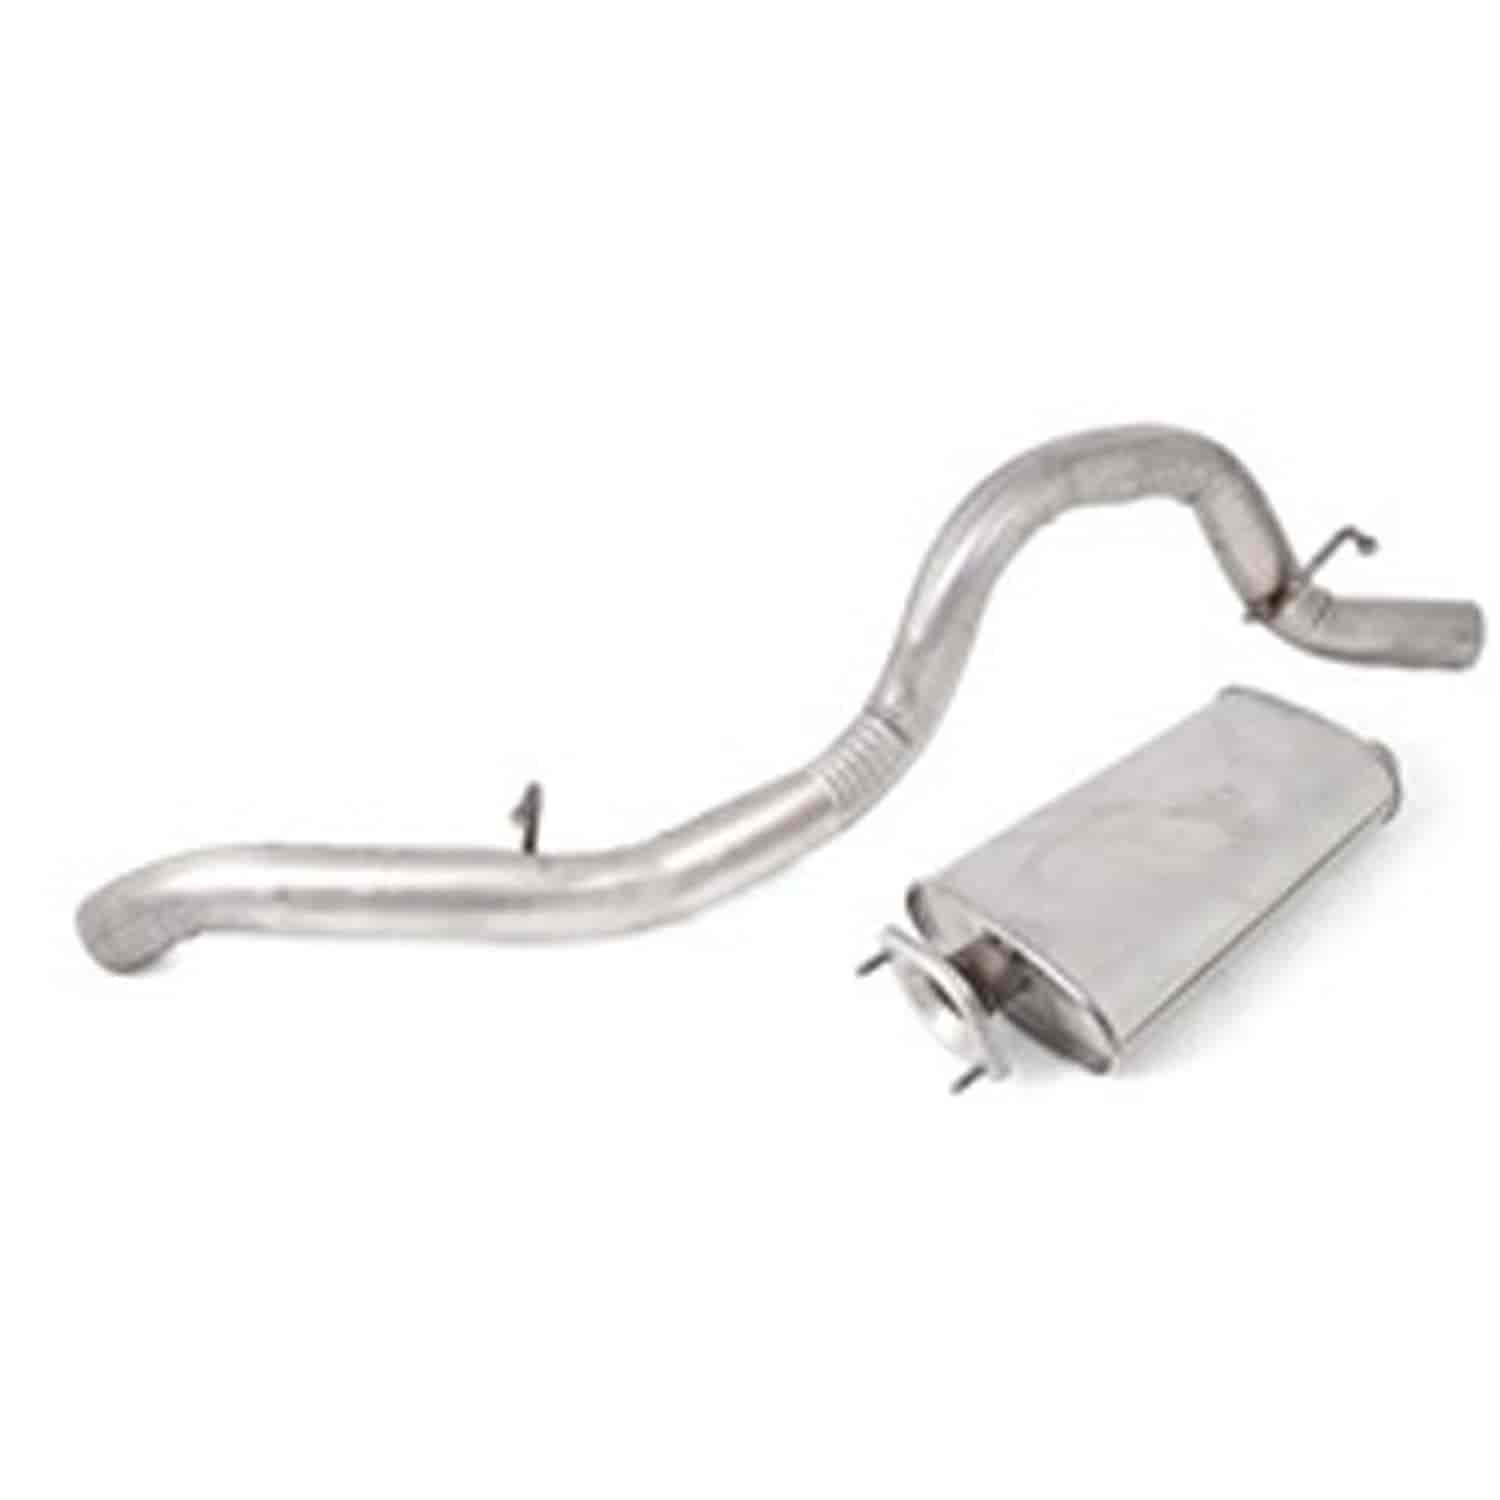 Muffler And Tailpipe 2000-2006 Wrangler After 1-24-00